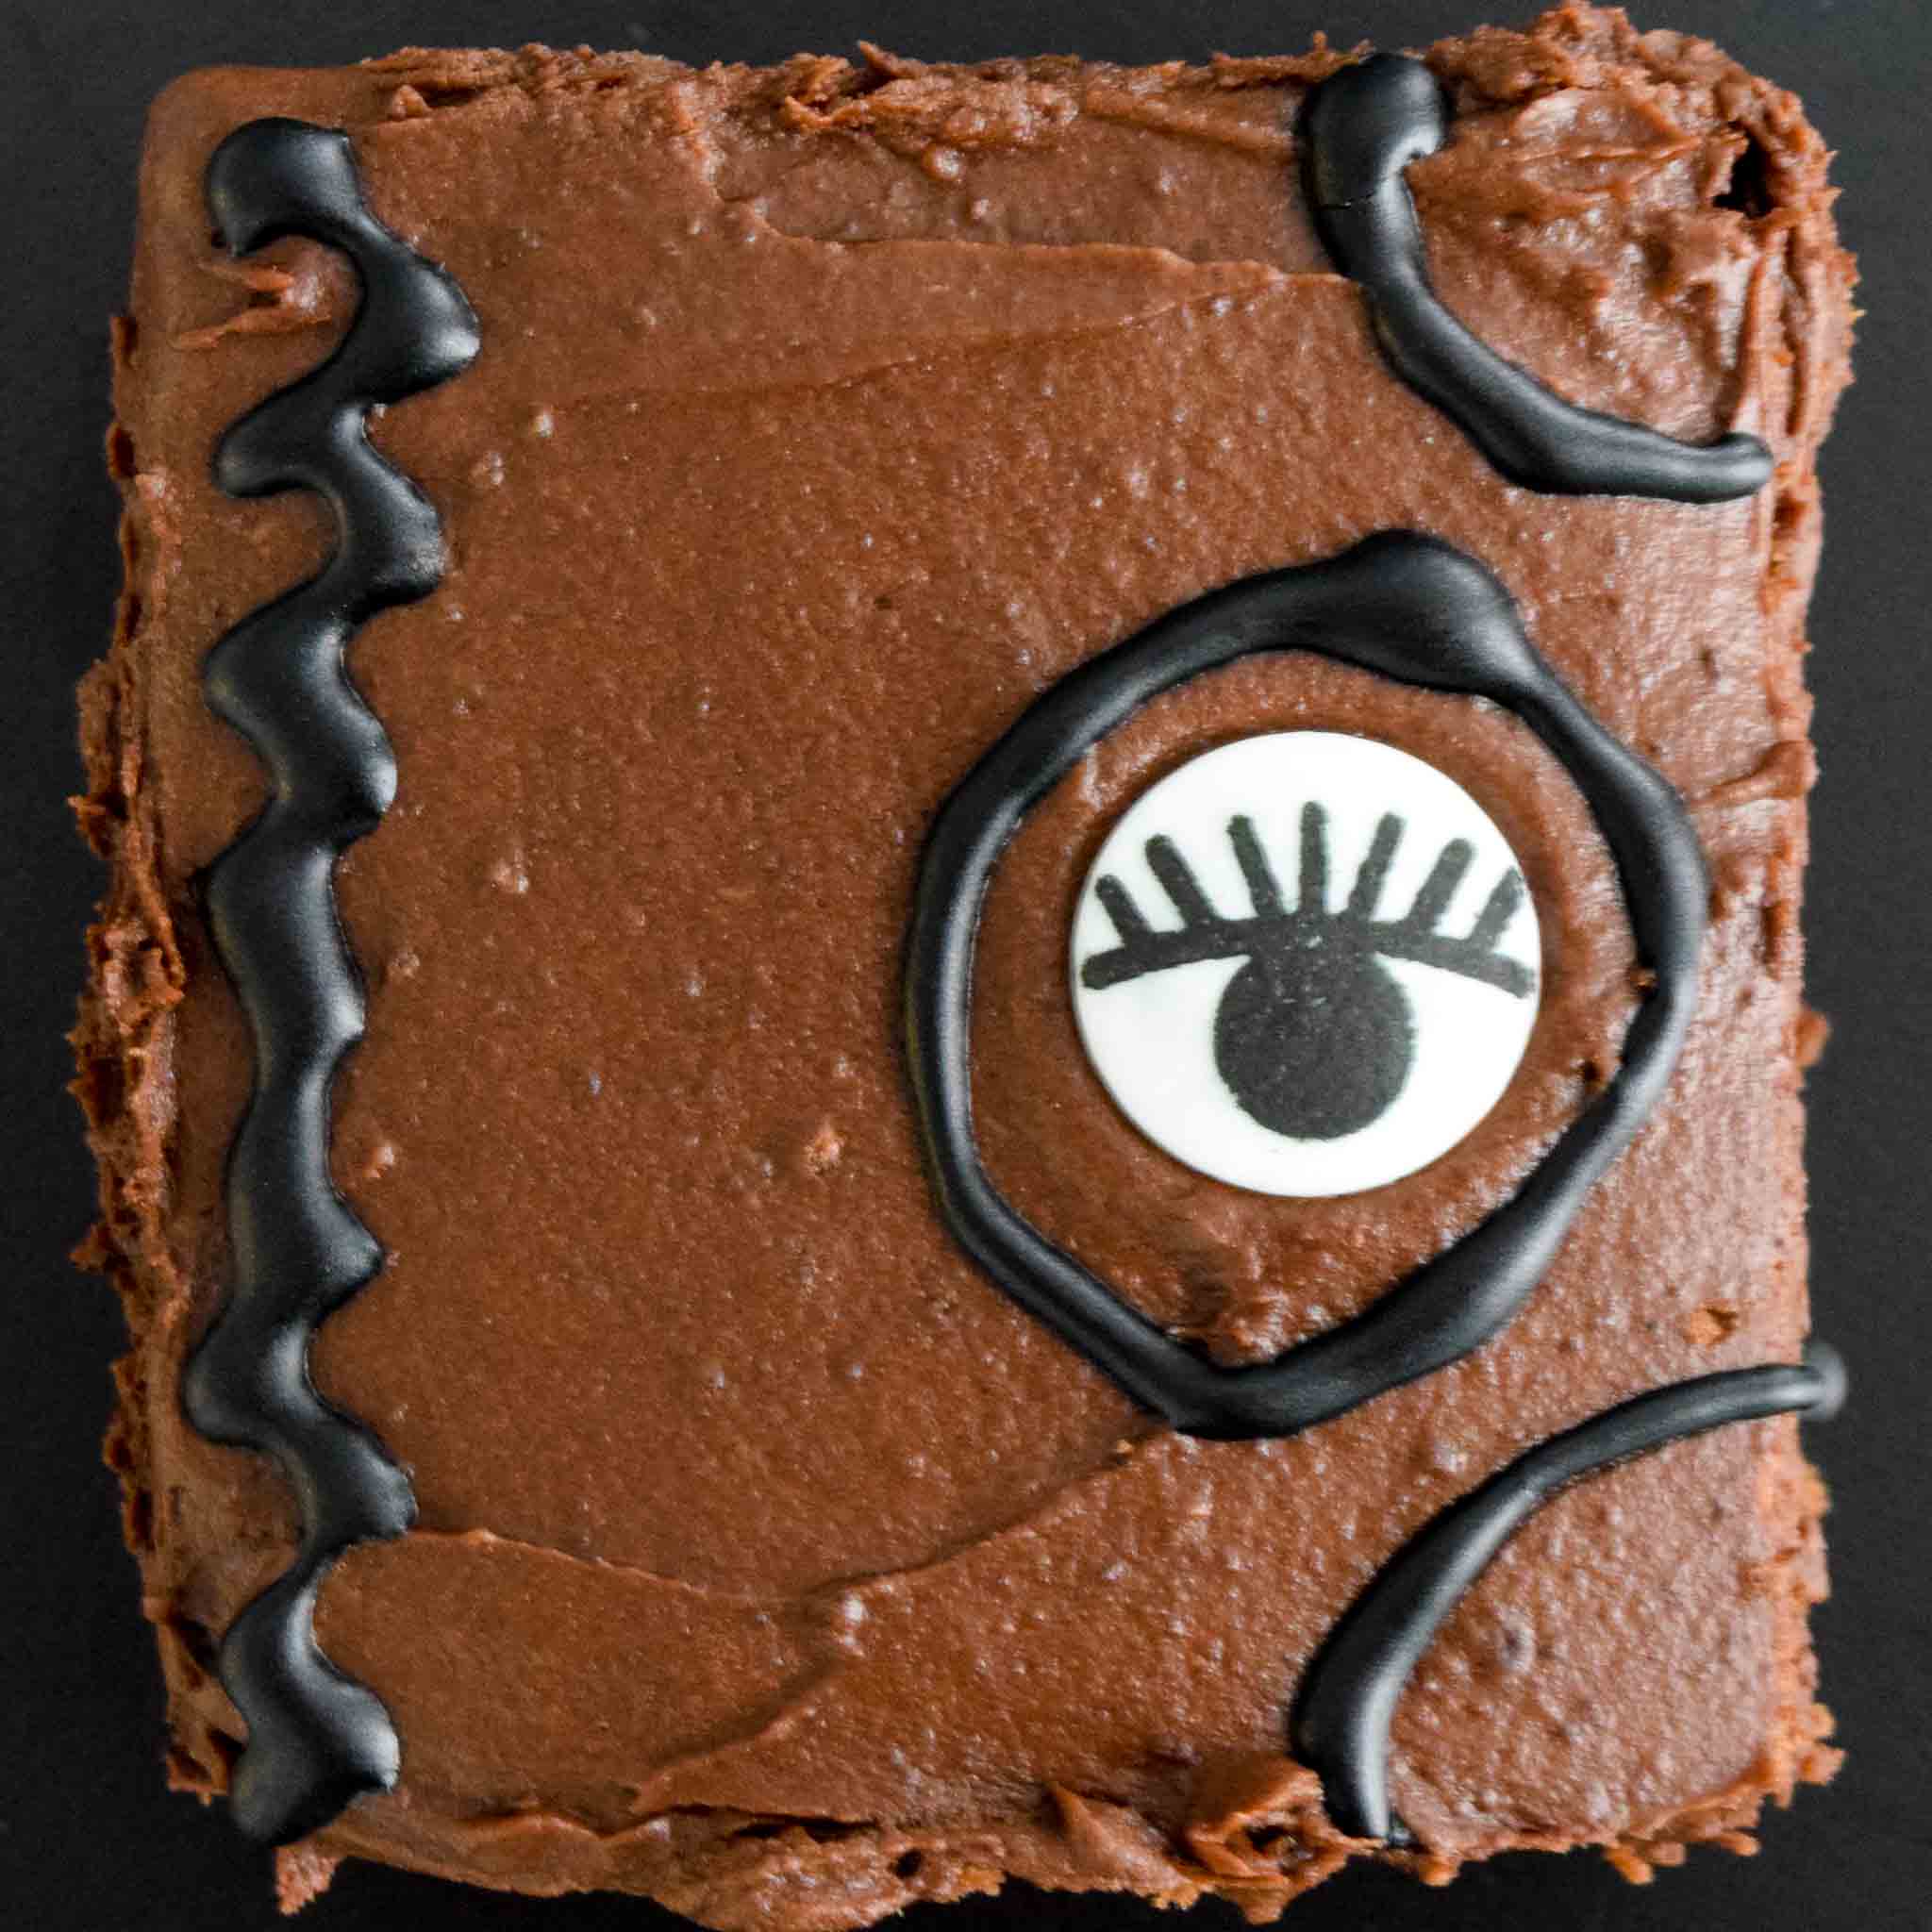 Brownie decorated like Hocus Pocus Spell book up close view